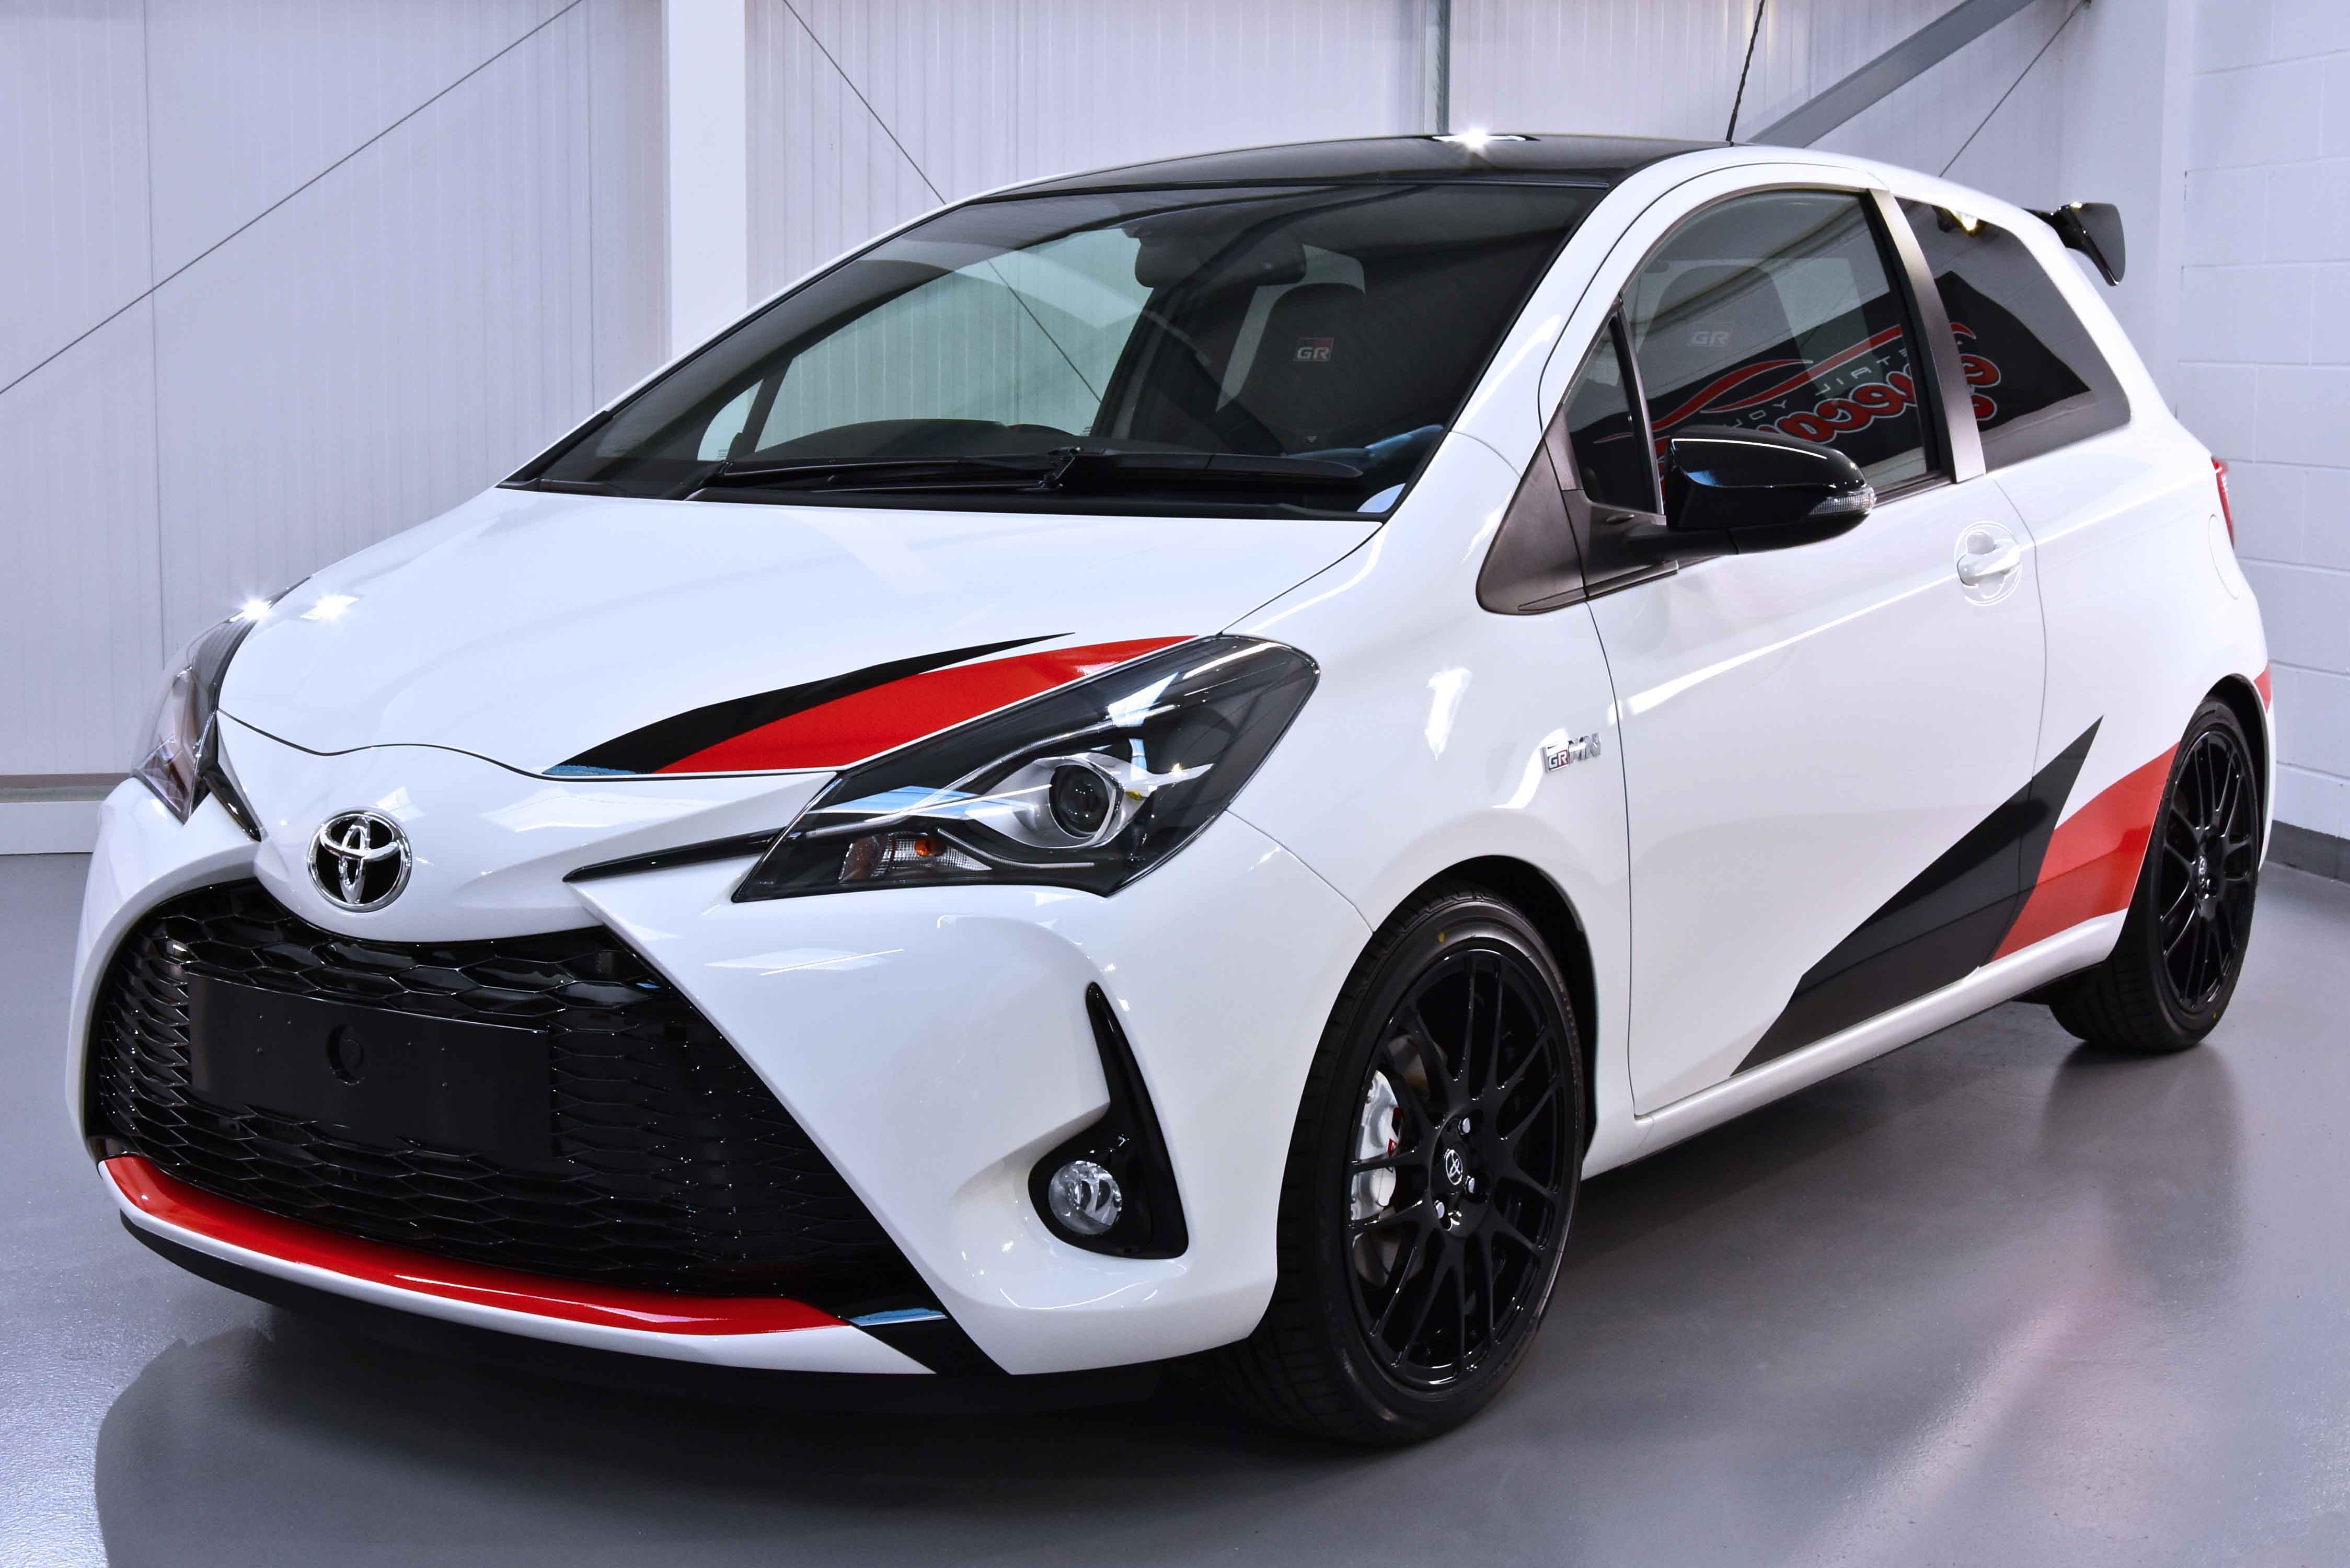 Toyota Yaris GRMN Car Enhancement and Protection Detail with Gtechniq Crystal Serum Ultra and EXOv4